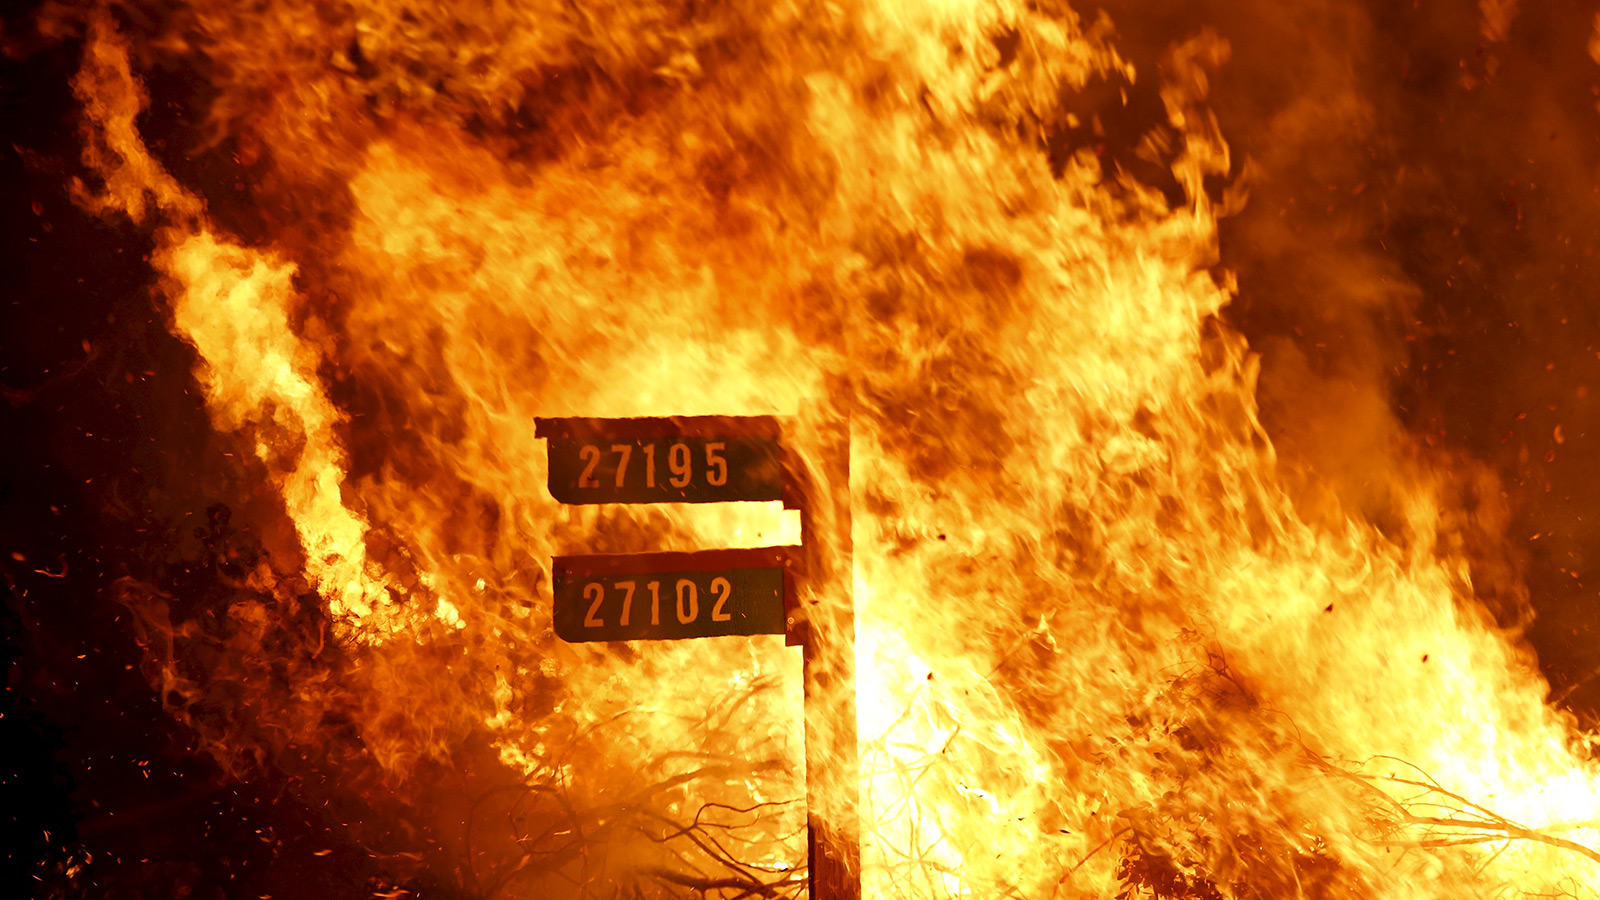 Flames from the Jerusalem Fire consume a sign containing addresses to homes along Morgan Valley Road in Lake County, California